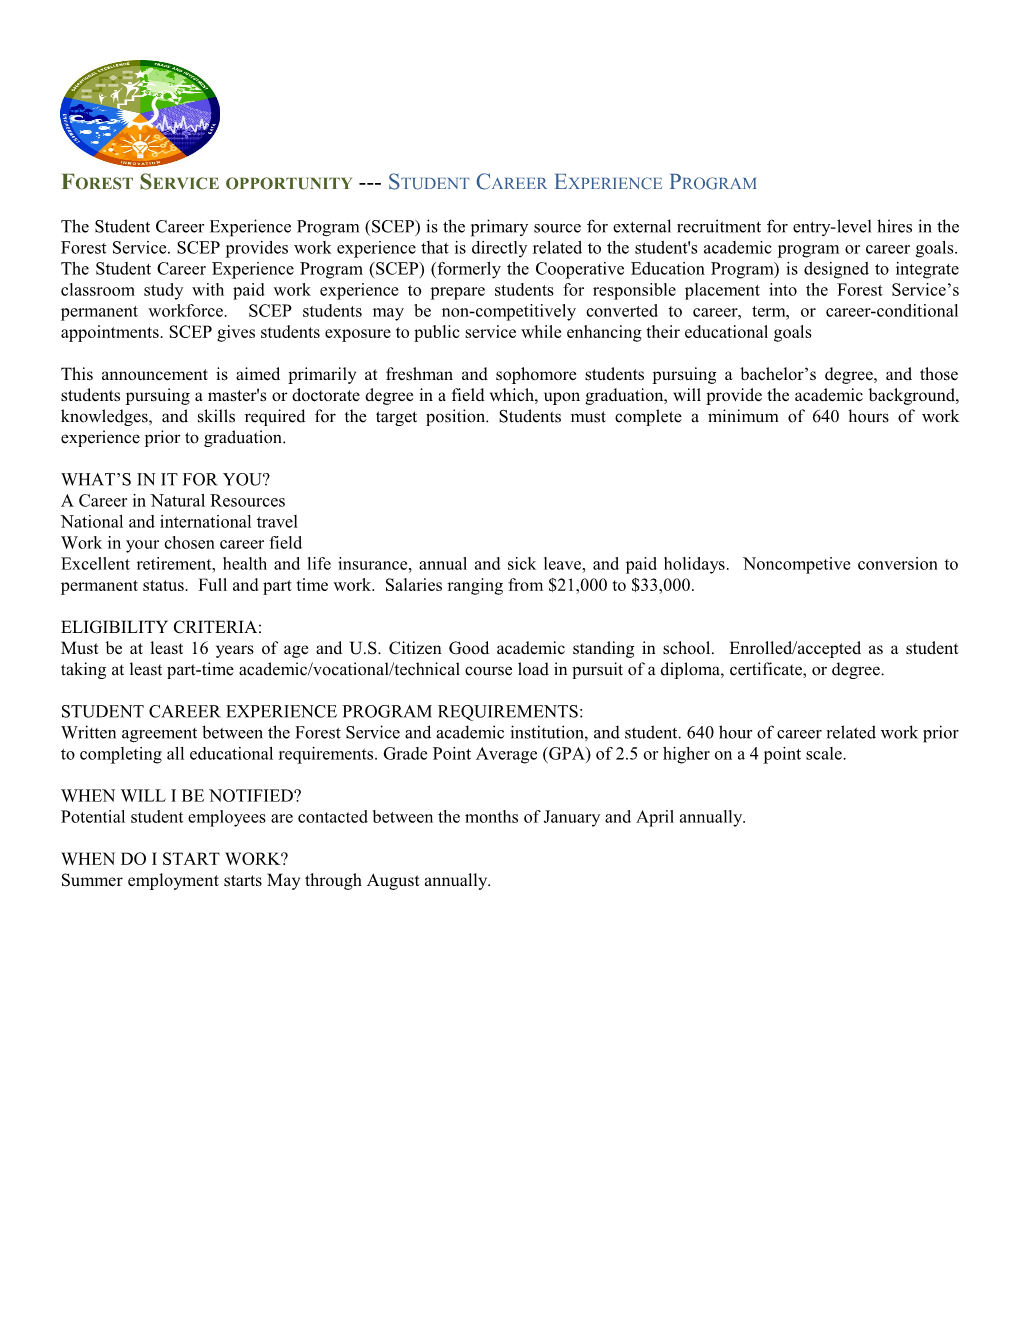 Forest Service Opportunity Student Career Experience Program